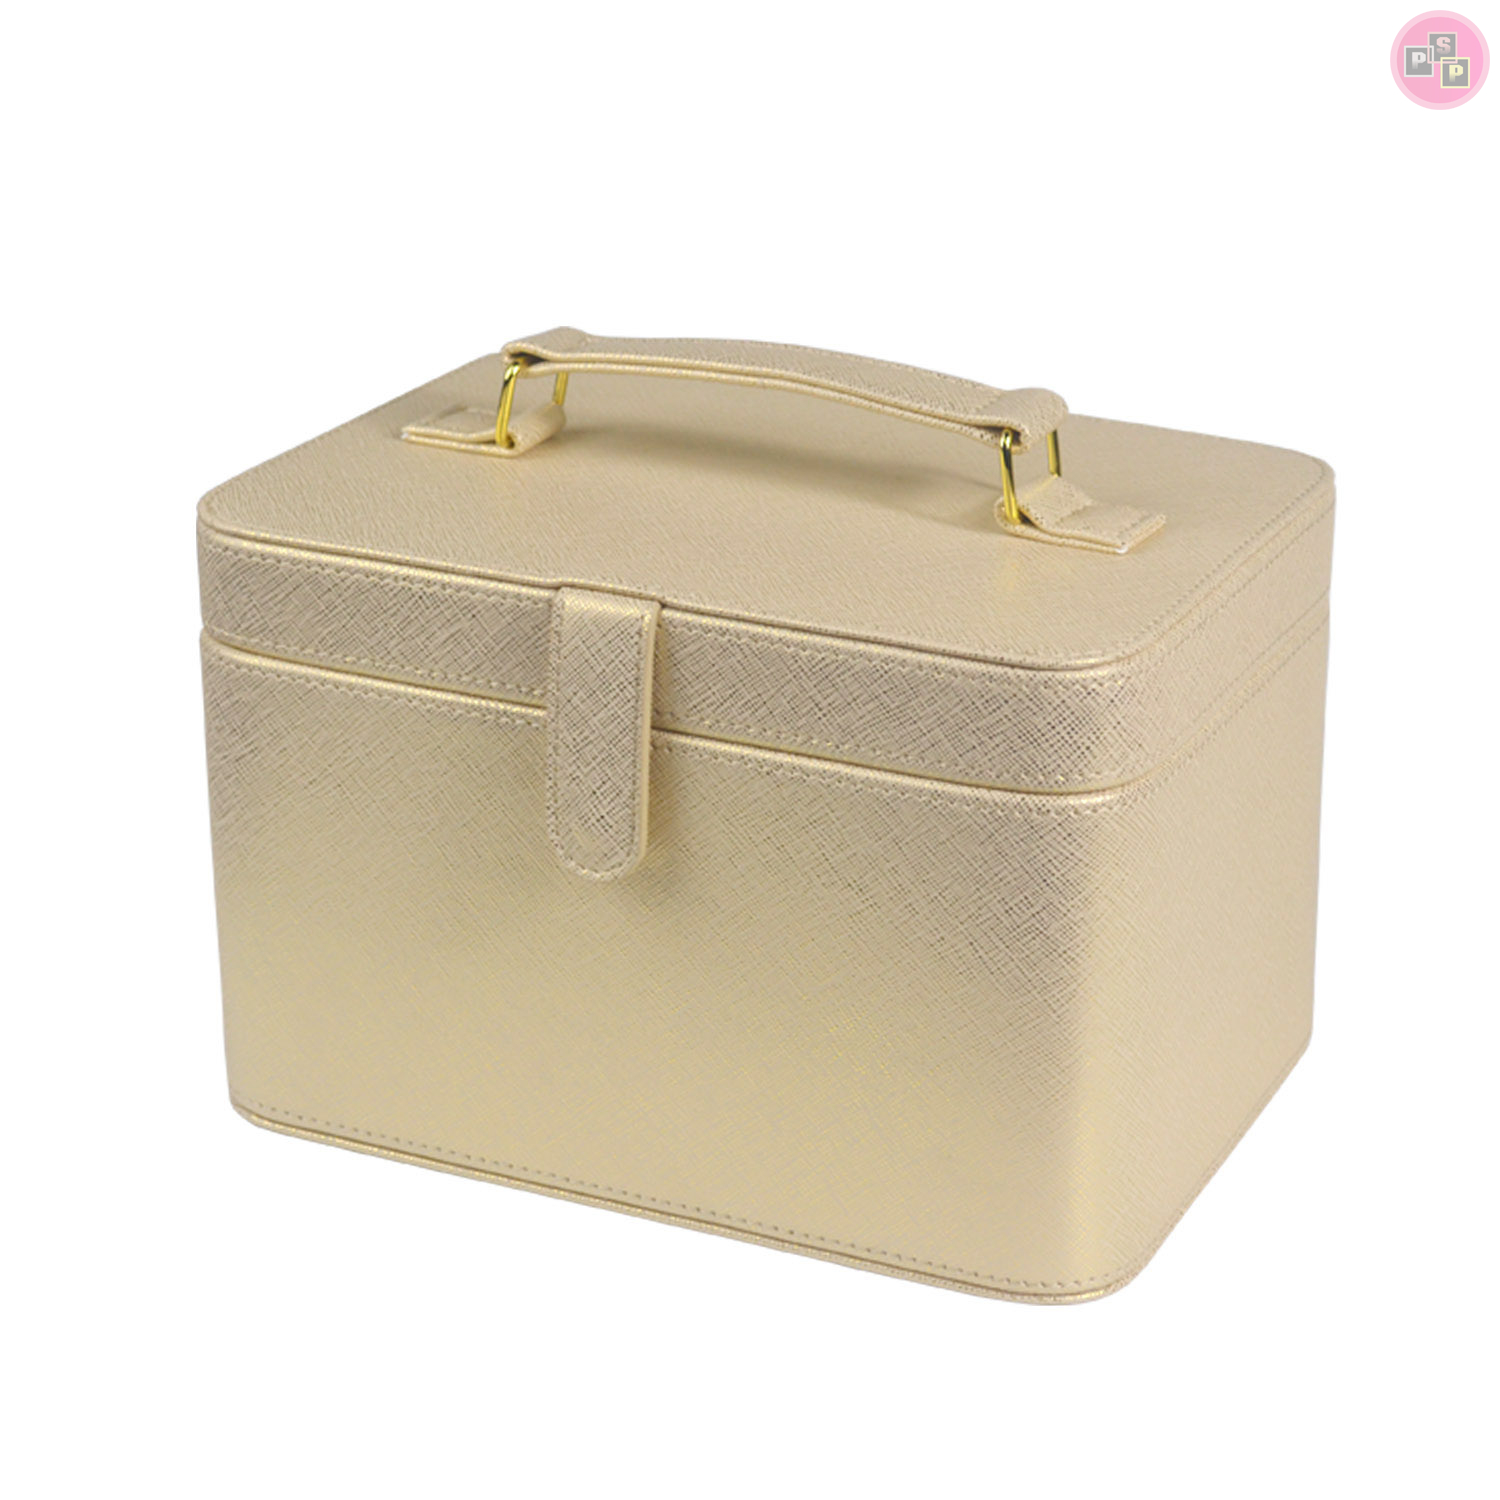 Gift Promotion PU Leather hard luggage case for cosmetic